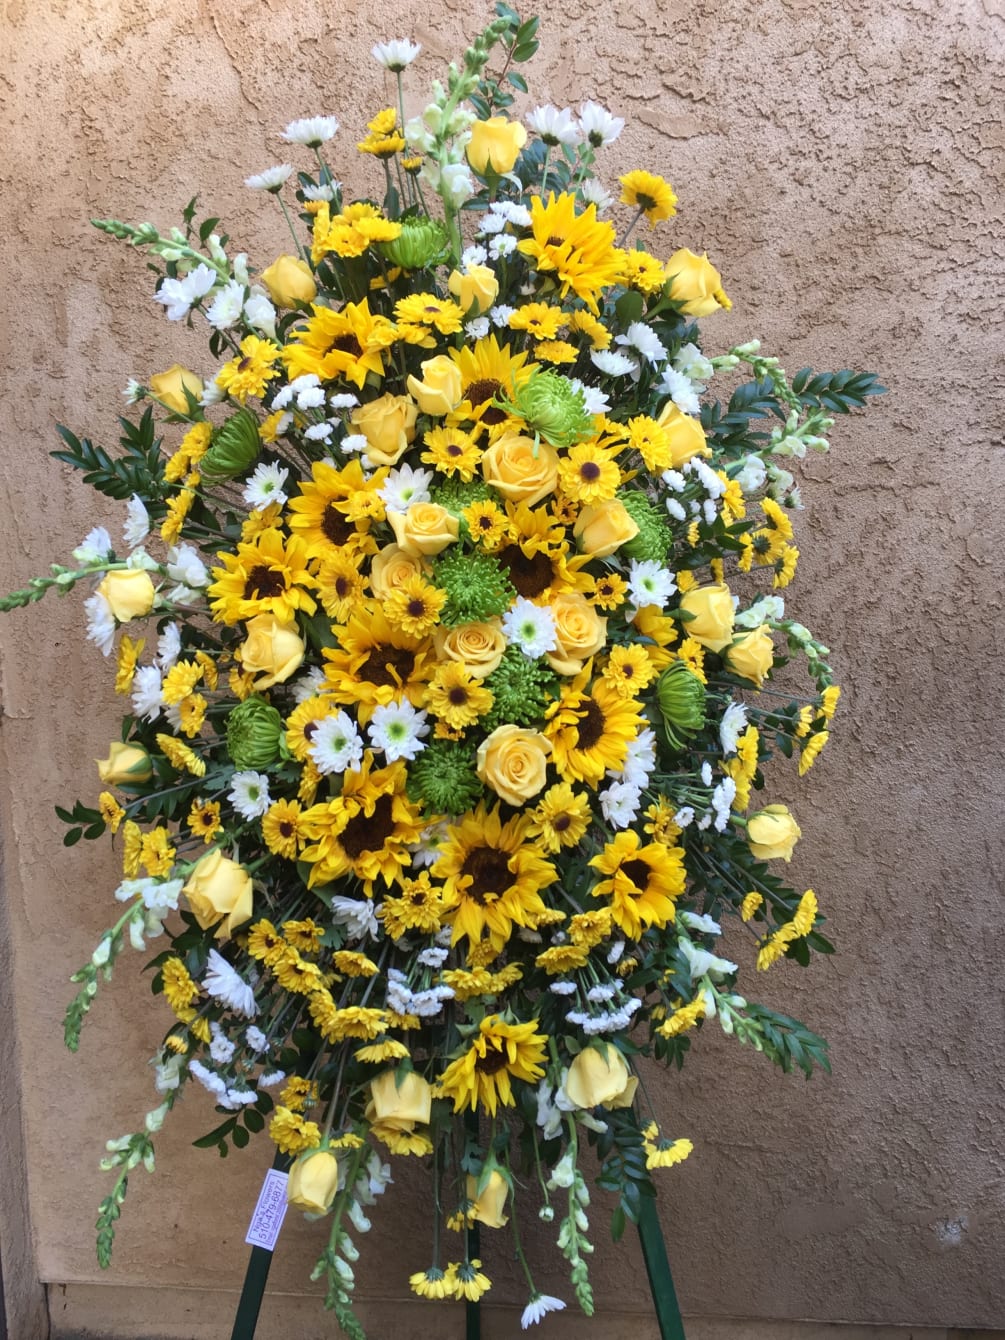 Funeral spray with white and yellow flowers.